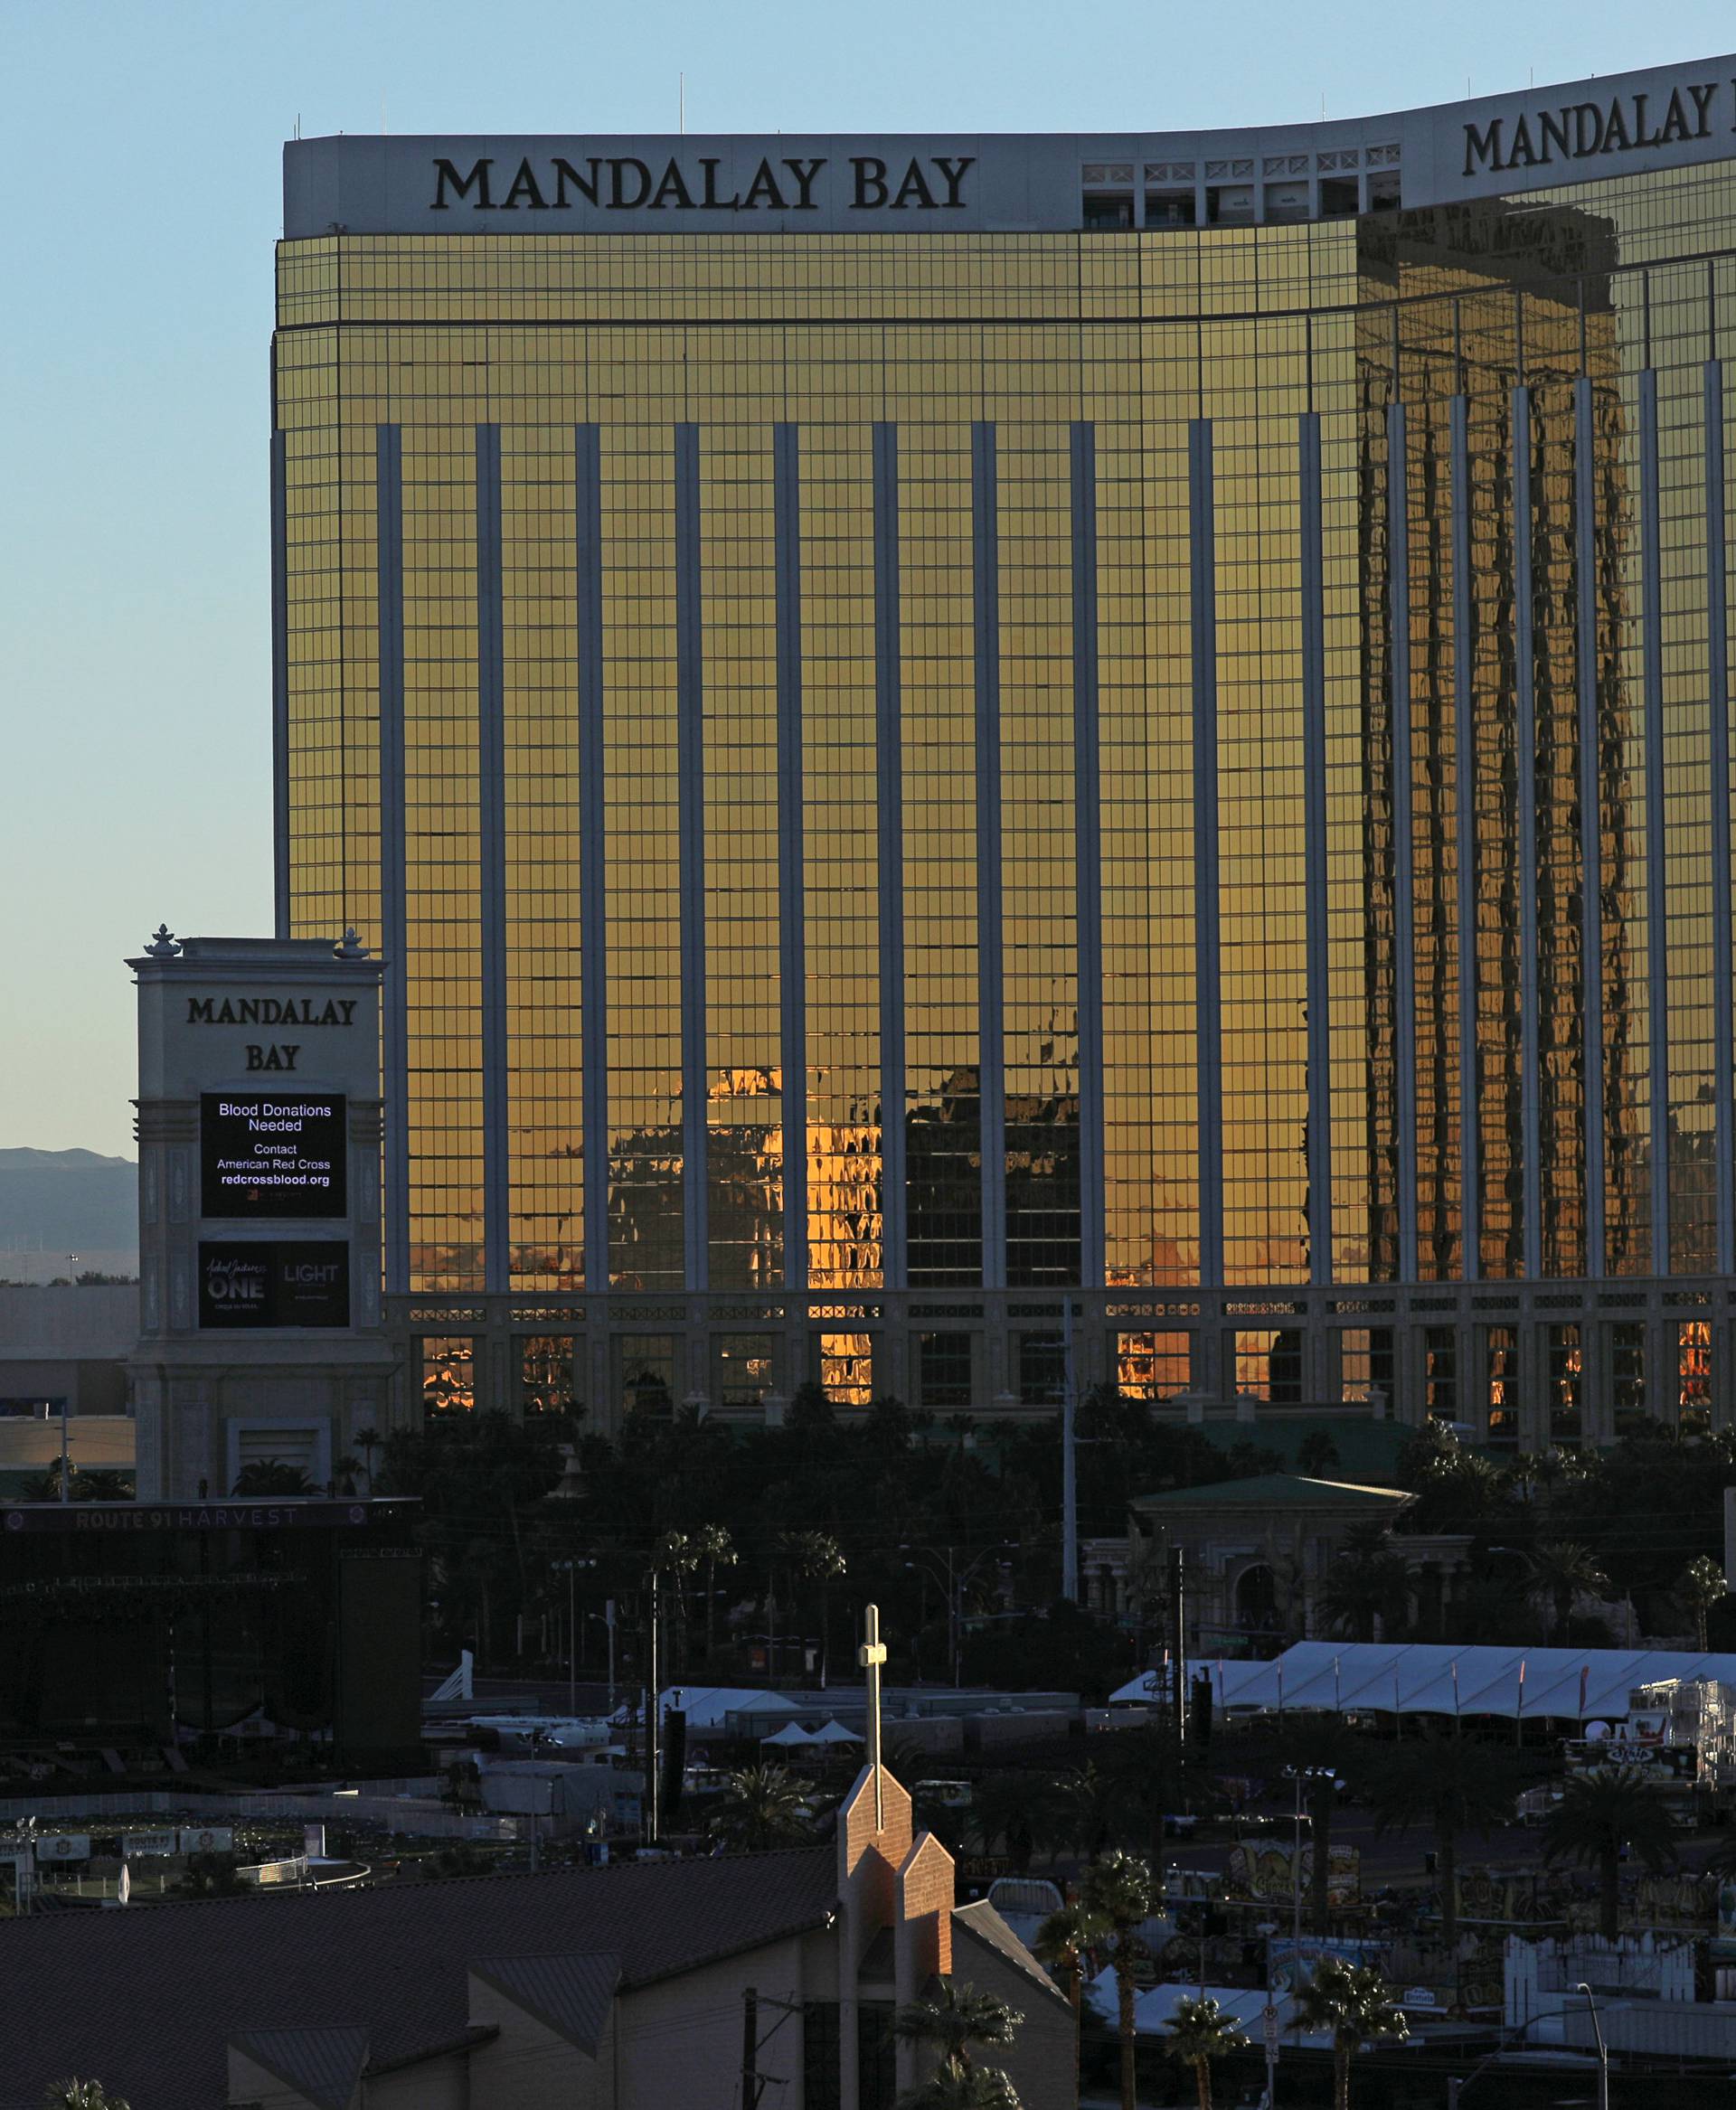 The scene in front of the stage and its surrounding areas are seen following a mass shooing at the Route 91 Harvest Country Music Festival on the Las Vegas Strip in Las Vegas, Nevada